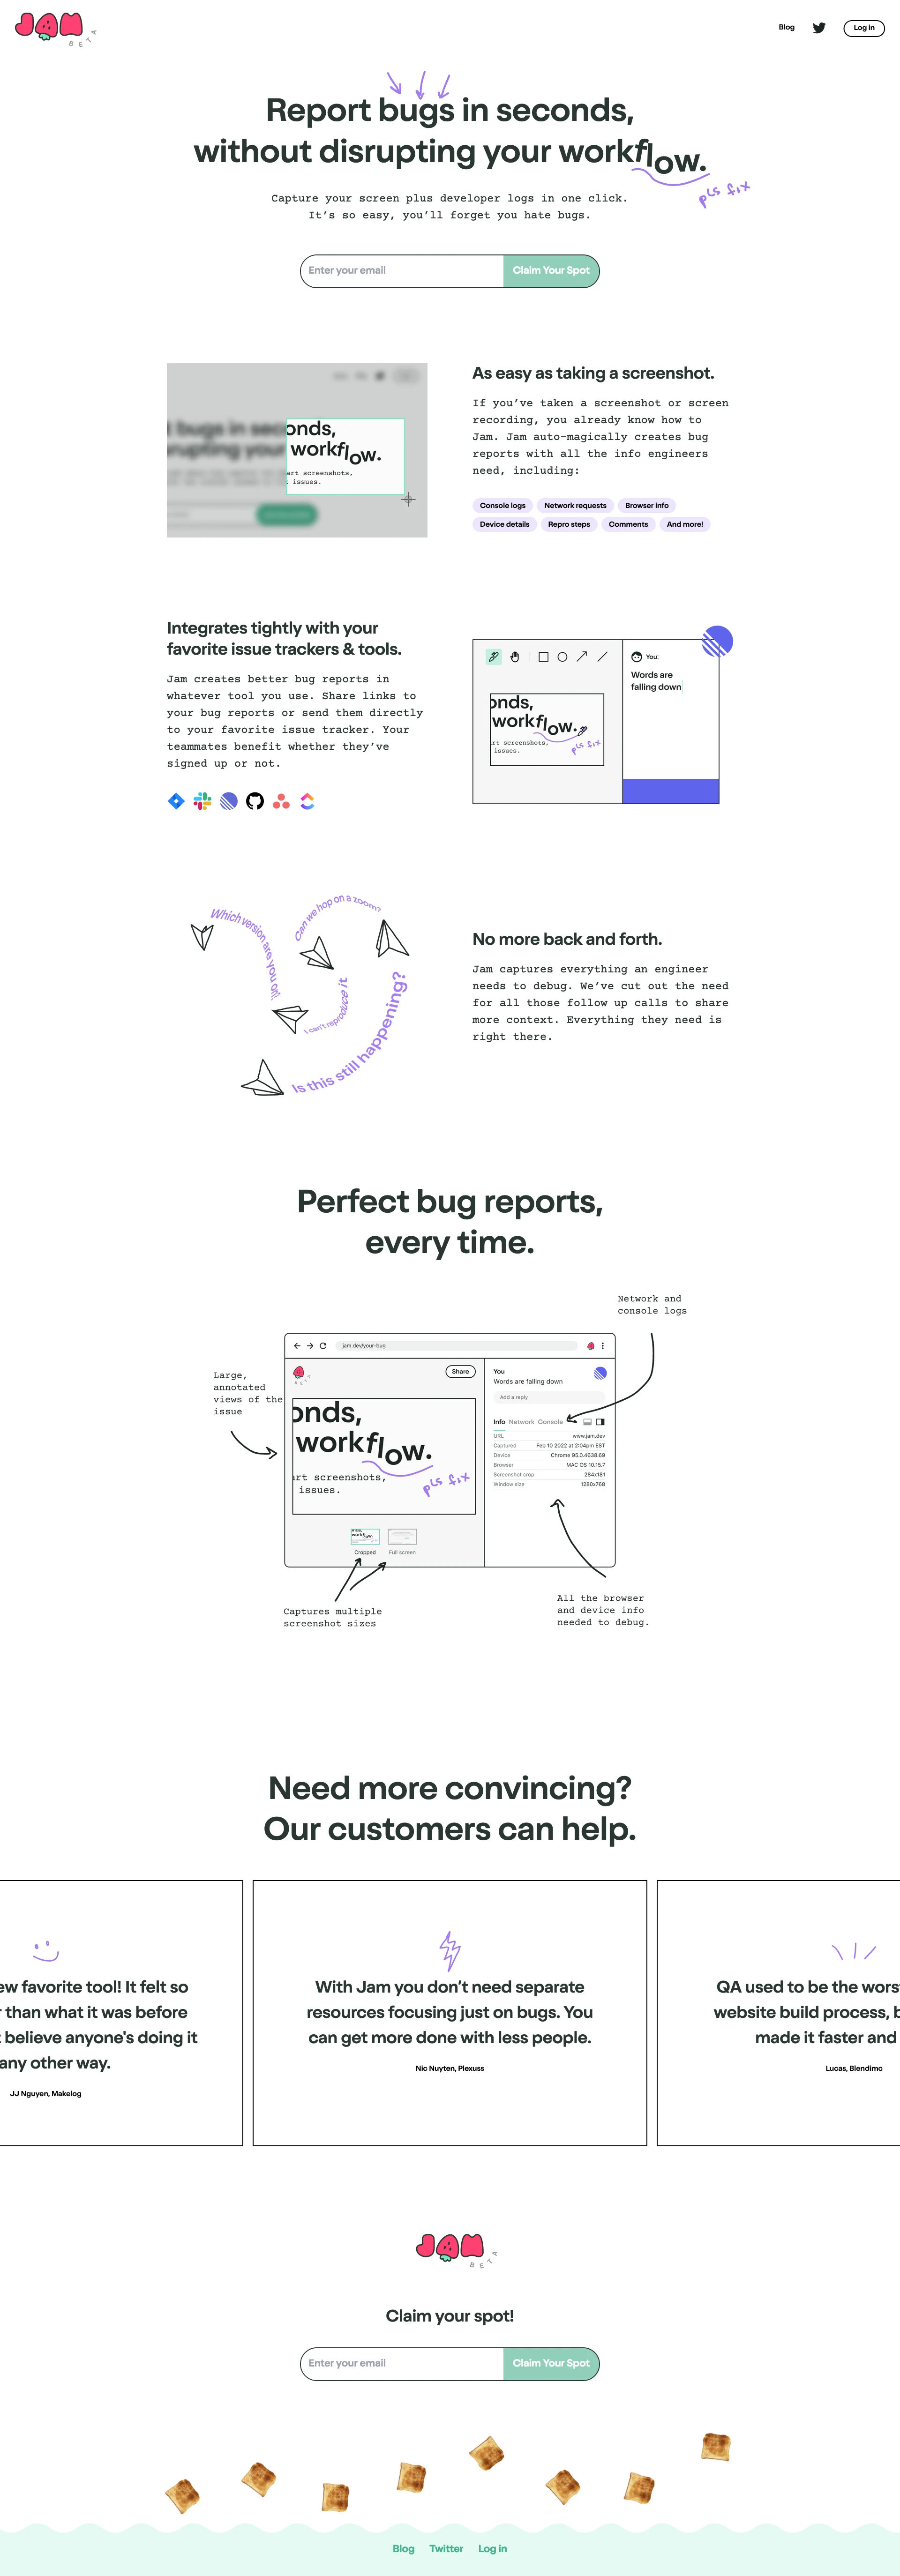 Jam Landing Page Example: Report bugs in seconds, and get back to what you were doing. It's as easy as taking a screenshot. Fast for you, and perfect for the engineers.